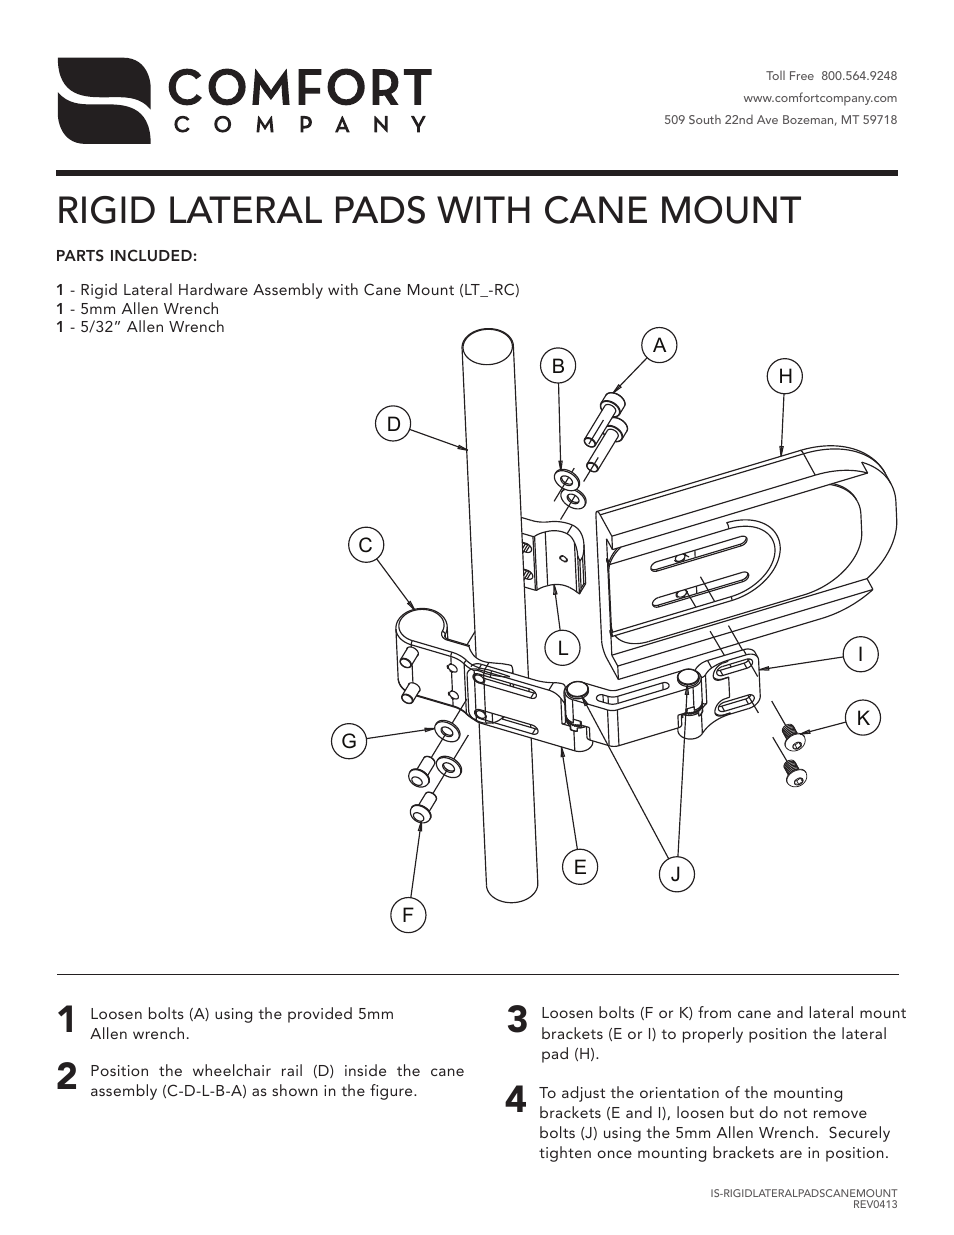 Rigid Lateral Pads Cane Mount